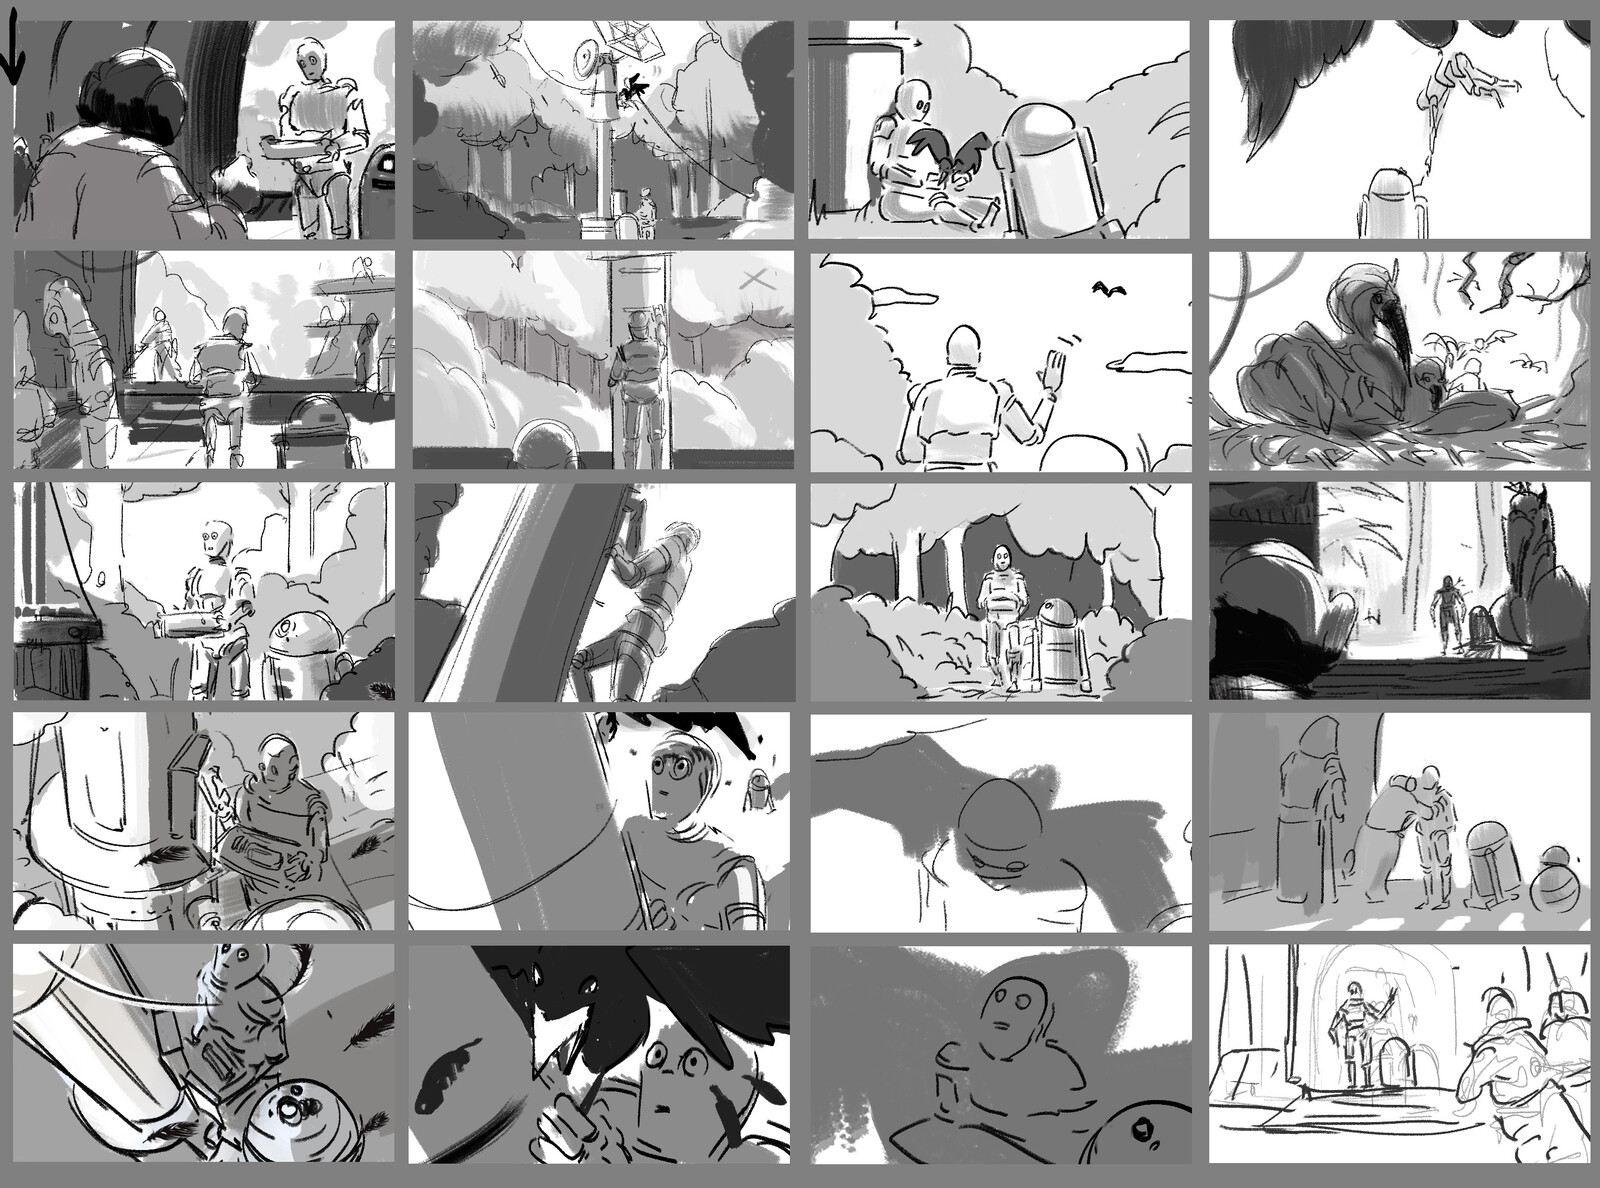 Did some quick story skecthes to find keyframe with some story moment. It's fun to make up story behind the keyframe..